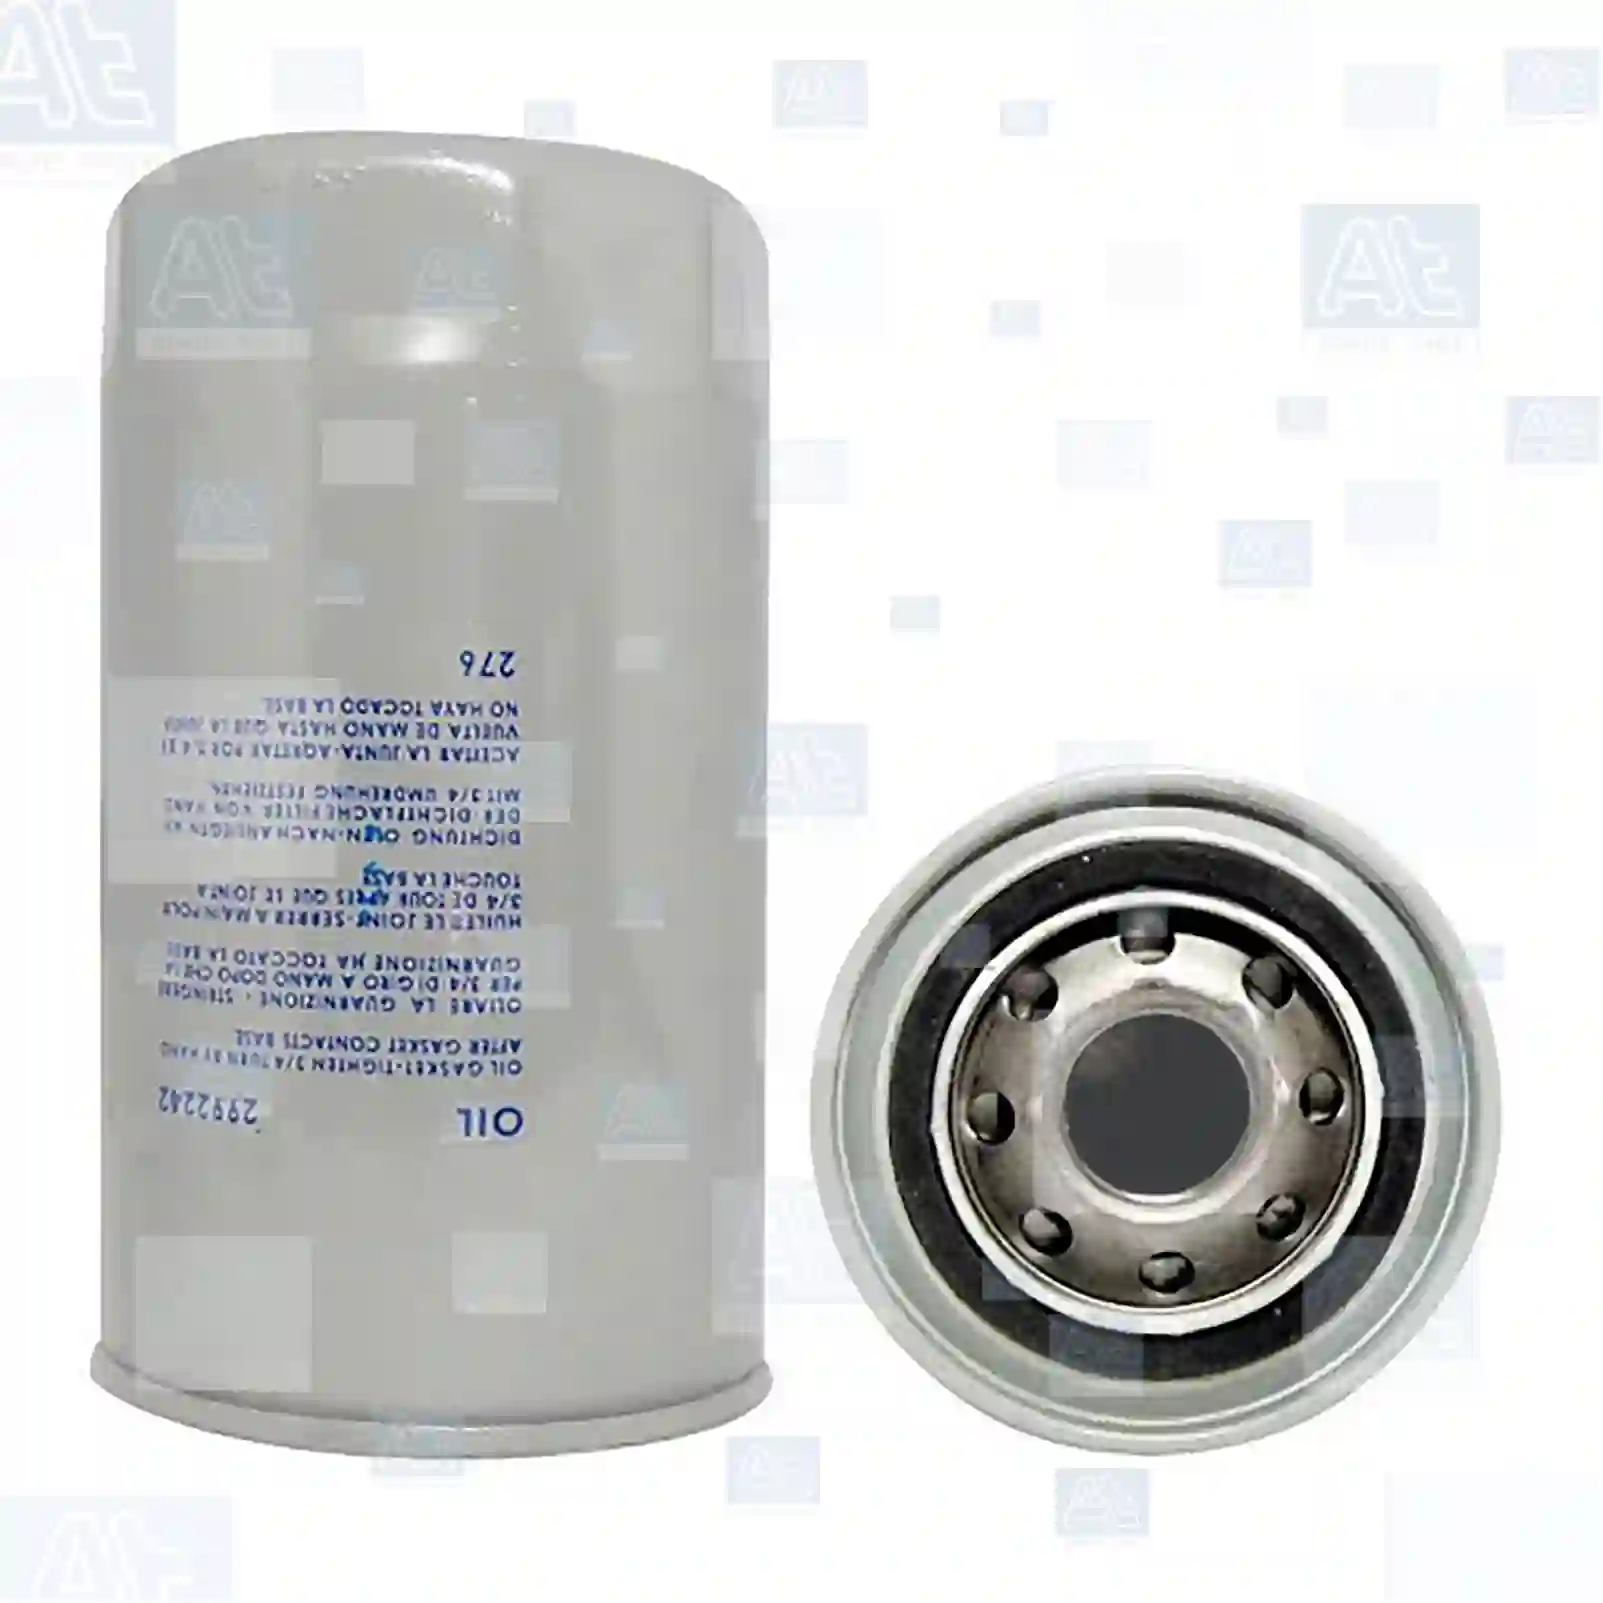 Oil filter, at no 77700882, oem no: 72516587, 402040222, 489789800, Z489789800, 84228510, 87803261, 4897898, 4989314, LF1601500, 402040222, Z489789800, 1399494, 1529642, 1706238, DP010205, 02992242, 04899566, 504033399, 504074043, BG5X-6731-AA, 3329105, 02943401, 02992242, 04899566, 2992242, 503120785, 503621940, 504033399, 504074043, 504118385, 87646666, 0281012005, K1399494PAC, 323017850, 323017850, 87803260MP, 87803260, 15208-LA40A, 15208-LA40B, 384240, 5021192695, 7424993654, 0120390146, 0120390154, 4897898, 0705031567, 15208LA40A, 20276815, 41501316, 2R0115403, ZG01709-0008 At Spare Part | Engine, Accelerator Pedal, Camshaft, Connecting Rod, Crankcase, Crankshaft, Cylinder Head, Engine Suspension Mountings, Exhaust Manifold, Exhaust Gas Recirculation, Filter Kits, Flywheel Housing, General Overhaul Kits, Engine, Intake Manifold, Oil Cleaner, Oil Cooler, Oil Filter, Oil Pump, Oil Sump, Piston & Liner, Sensor & Switch, Timing Case, Turbocharger, Cooling System, Belt Tensioner, Coolant Filter, Coolant Pipe, Corrosion Prevention Agent, Drive, Expansion Tank, Fan, Intercooler, Monitors & Gauges, Radiator, Thermostat, V-Belt / Timing belt, Water Pump, Fuel System, Electronical Injector Unit, Feed Pump, Fuel Filter, cpl., Fuel Gauge Sender,  Fuel Line, Fuel Pump, Fuel Tank, Injection Line Kit, Injection Pump, Exhaust System, Clutch & Pedal, Gearbox, Propeller Shaft, Axles, Brake System, Hubs & Wheels, Suspension, Leaf Spring, Universal Parts / Accessories, Steering, Electrical System, Cabin Oil filter, at no 77700882, oem no: 72516587, 402040222, 489789800, Z489789800, 84228510, 87803261, 4897898, 4989314, LF1601500, 402040222, Z489789800, 1399494, 1529642, 1706238, DP010205, 02992242, 04899566, 504033399, 504074043, BG5X-6731-AA, 3329105, 02943401, 02992242, 04899566, 2992242, 503120785, 503621940, 504033399, 504074043, 504118385, 87646666, 0281012005, K1399494PAC, 323017850, 323017850, 87803260MP, 87803260, 15208-LA40A, 15208-LA40B, 384240, 5021192695, 7424993654, 0120390146, 0120390154, 4897898, 0705031567, 15208LA40A, 20276815, 41501316, 2R0115403, ZG01709-0008 At Spare Part | Engine, Accelerator Pedal, Camshaft, Connecting Rod, Crankcase, Crankshaft, Cylinder Head, Engine Suspension Mountings, Exhaust Manifold, Exhaust Gas Recirculation, Filter Kits, Flywheel Housing, General Overhaul Kits, Engine, Intake Manifold, Oil Cleaner, Oil Cooler, Oil Filter, Oil Pump, Oil Sump, Piston & Liner, Sensor & Switch, Timing Case, Turbocharger, Cooling System, Belt Tensioner, Coolant Filter, Coolant Pipe, Corrosion Prevention Agent, Drive, Expansion Tank, Fan, Intercooler, Monitors & Gauges, Radiator, Thermostat, V-Belt / Timing belt, Water Pump, Fuel System, Electronical Injector Unit, Feed Pump, Fuel Filter, cpl., Fuel Gauge Sender,  Fuel Line, Fuel Pump, Fuel Tank, Injection Line Kit, Injection Pump, Exhaust System, Clutch & Pedal, Gearbox, Propeller Shaft, Axles, Brake System, Hubs & Wheels, Suspension, Leaf Spring, Universal Parts / Accessories, Steering, Electrical System, Cabin